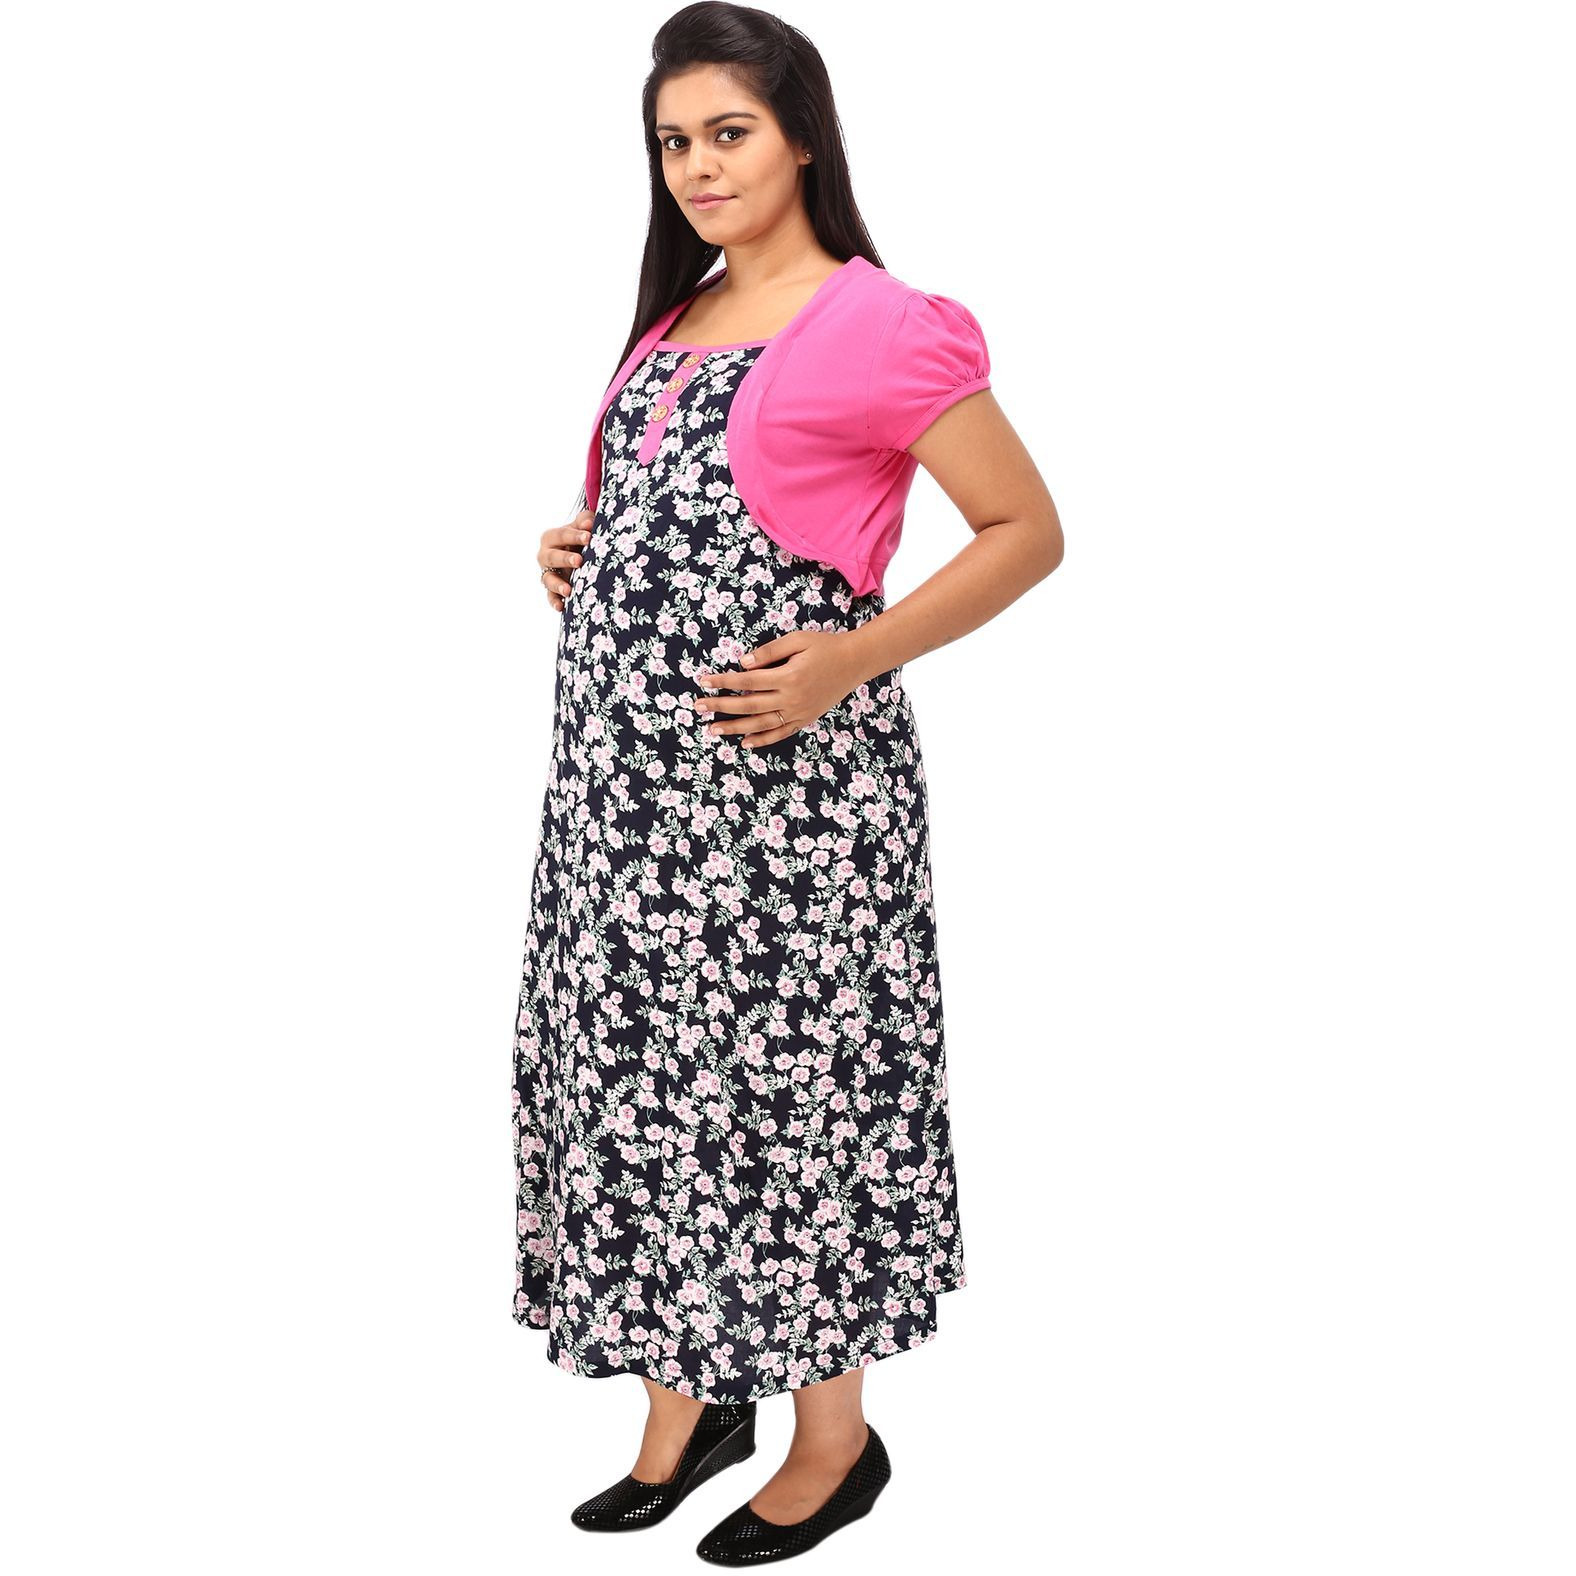 Mamma's Maternity Women's Pink and Black Floral Maternity Dress